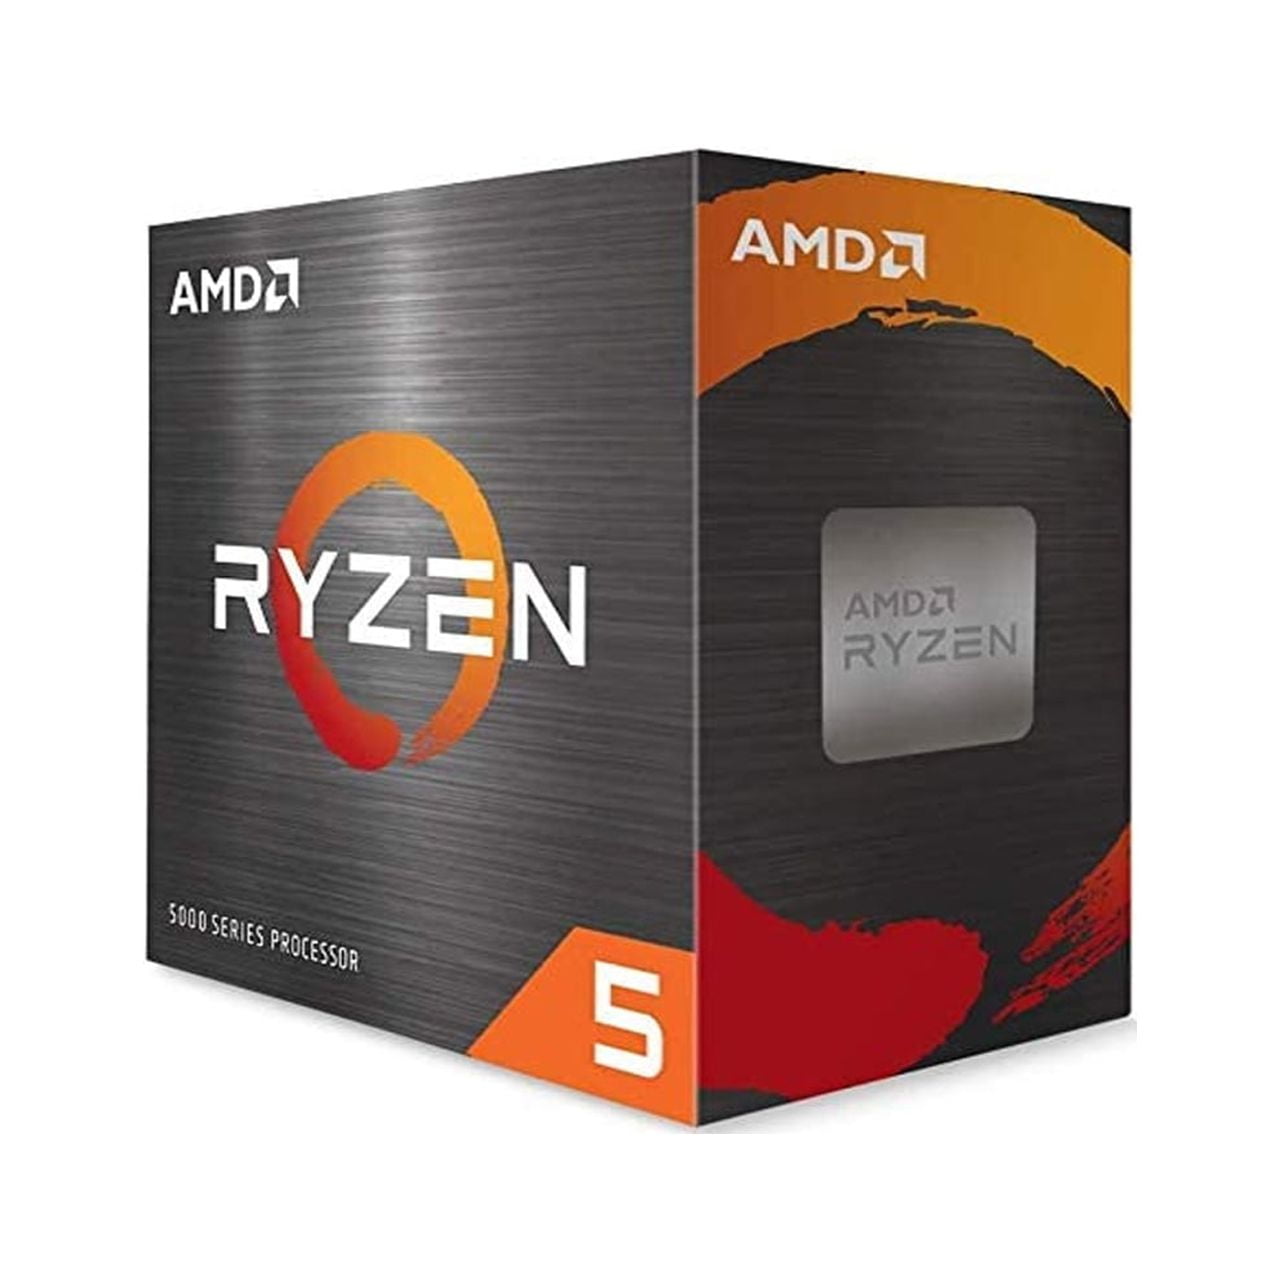 AMD Ryzen 5 3500 Desktop Processor up to 4.1 GHz Socket-AM4 65W with Wraith  Stealth Cooler 100-100000050BOX